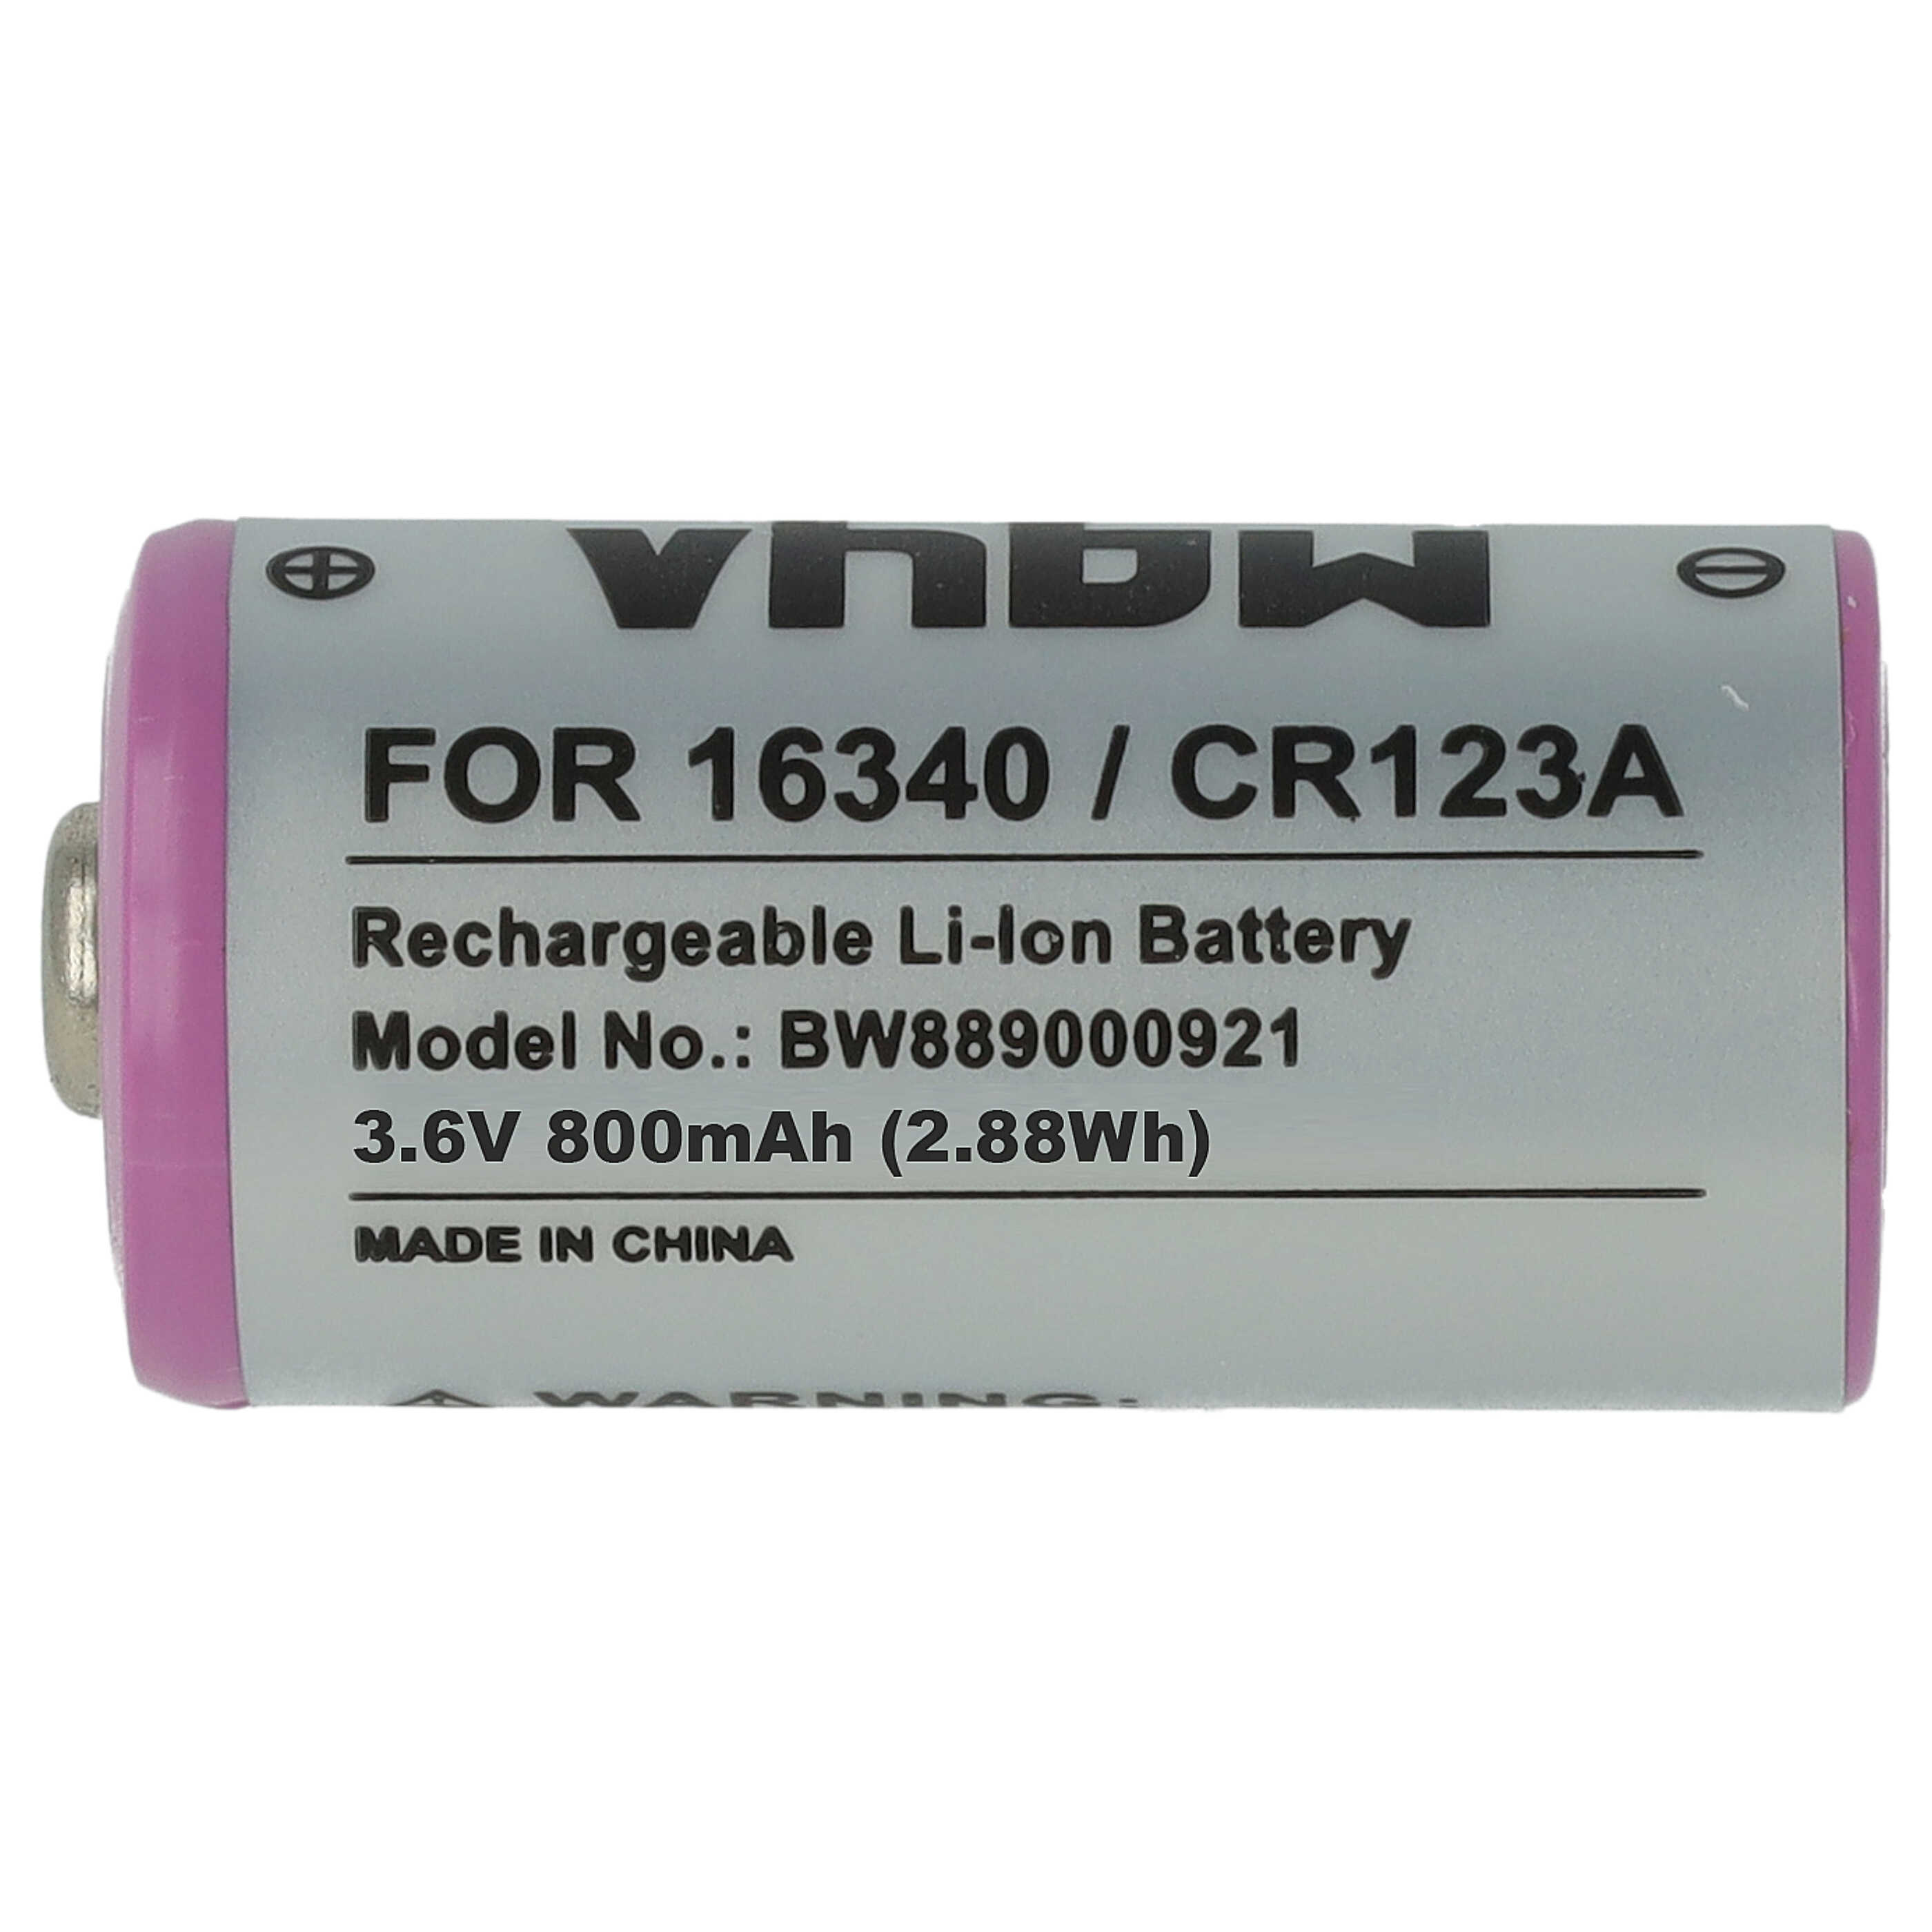 Universal Battery Replacement for 16340, DL123A, CR123R, CR17335, CR17345, CR123A - 800mAh 3.6V Li-Ion